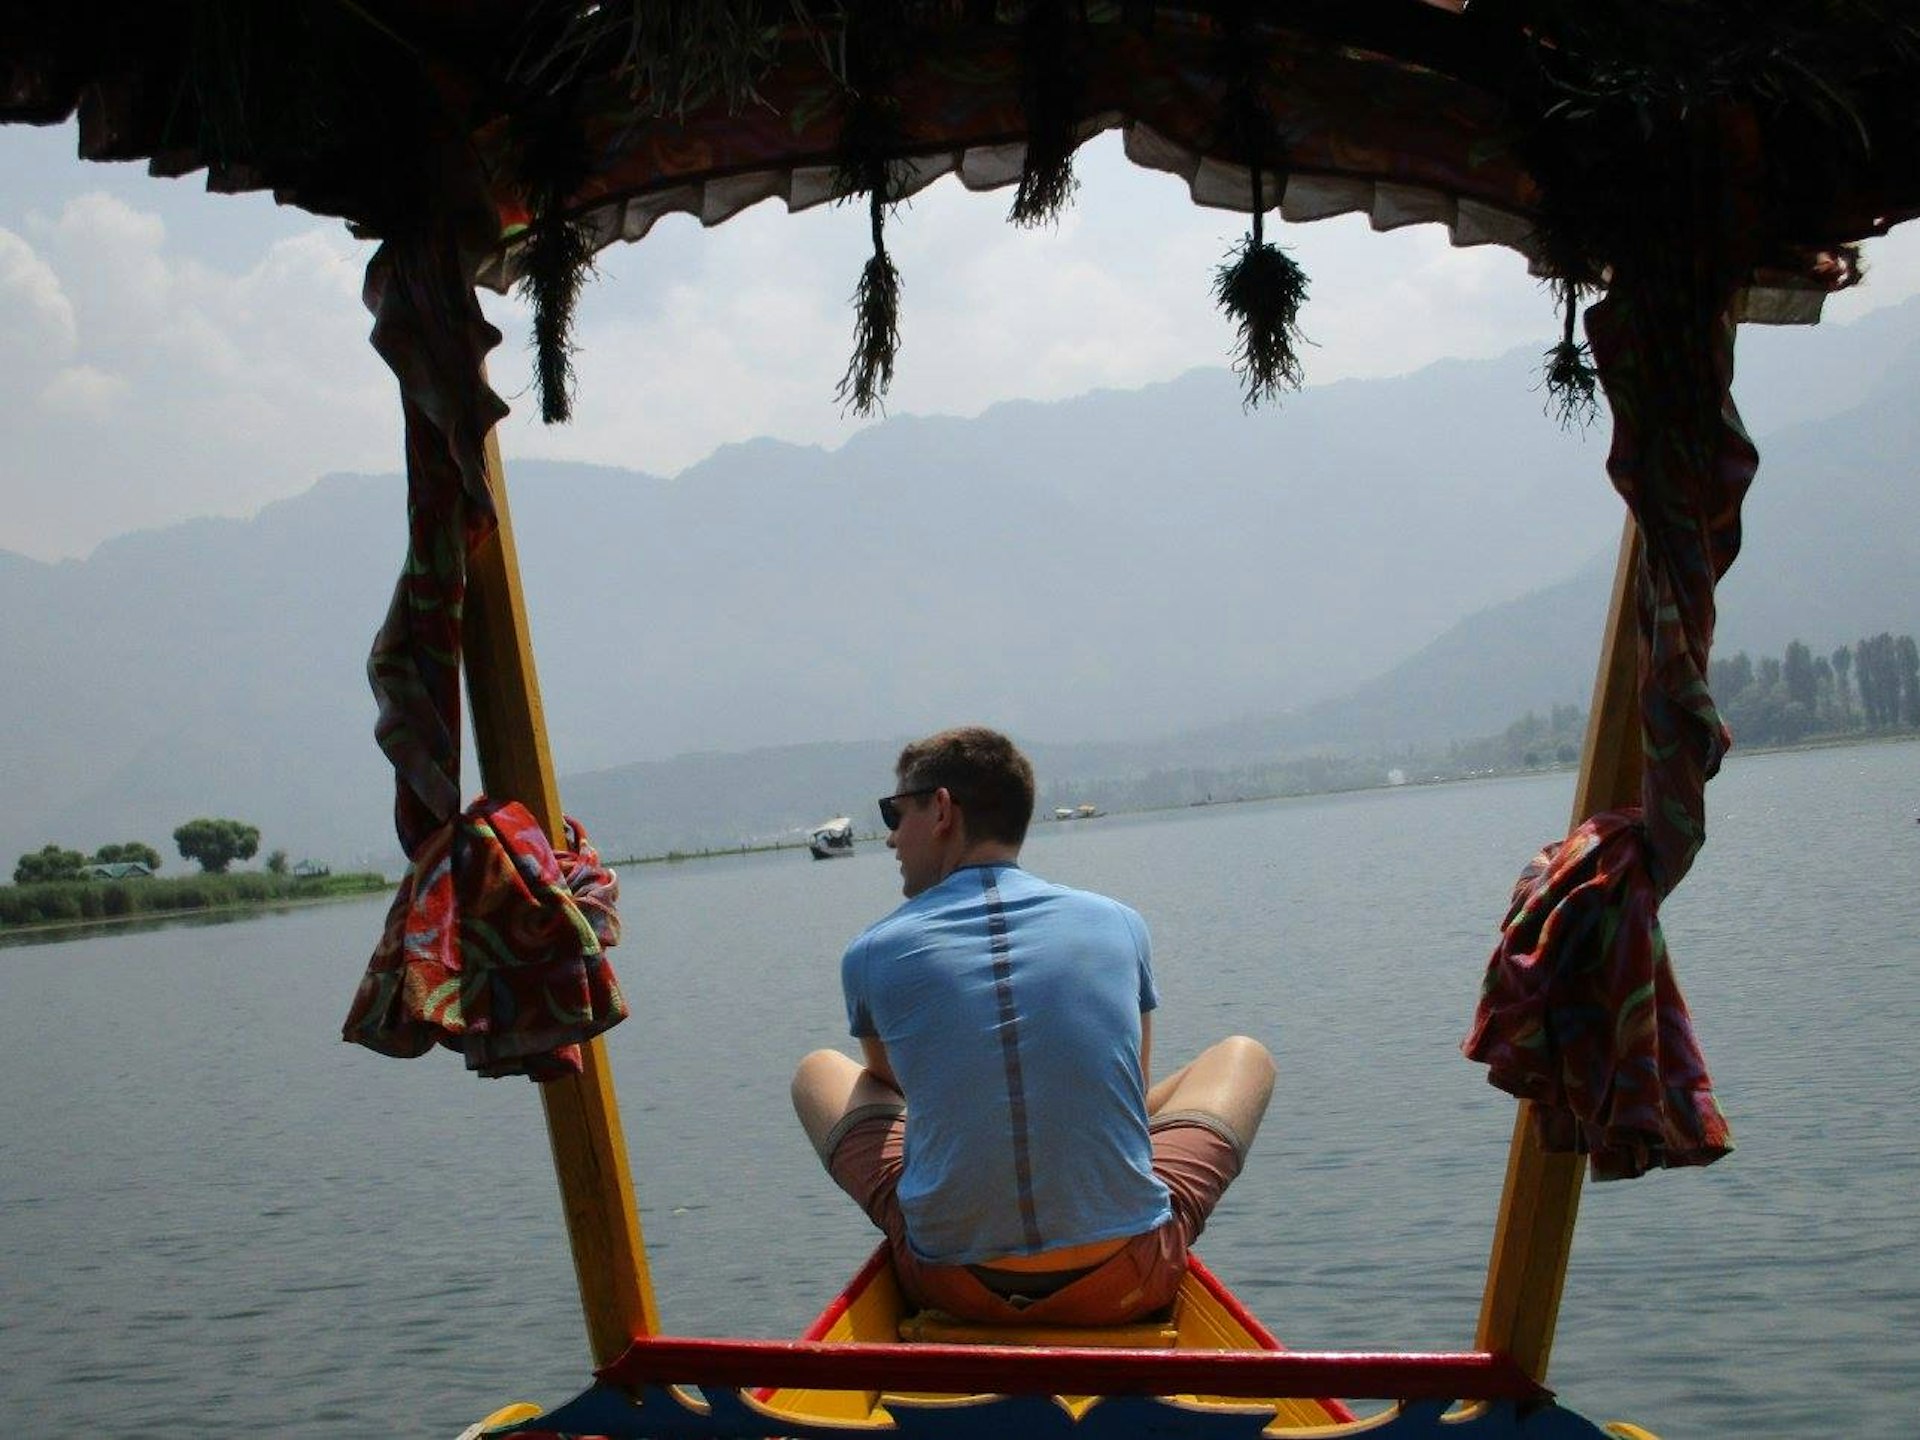 A man sits cross-legged at the prow of a small boat on a large lake